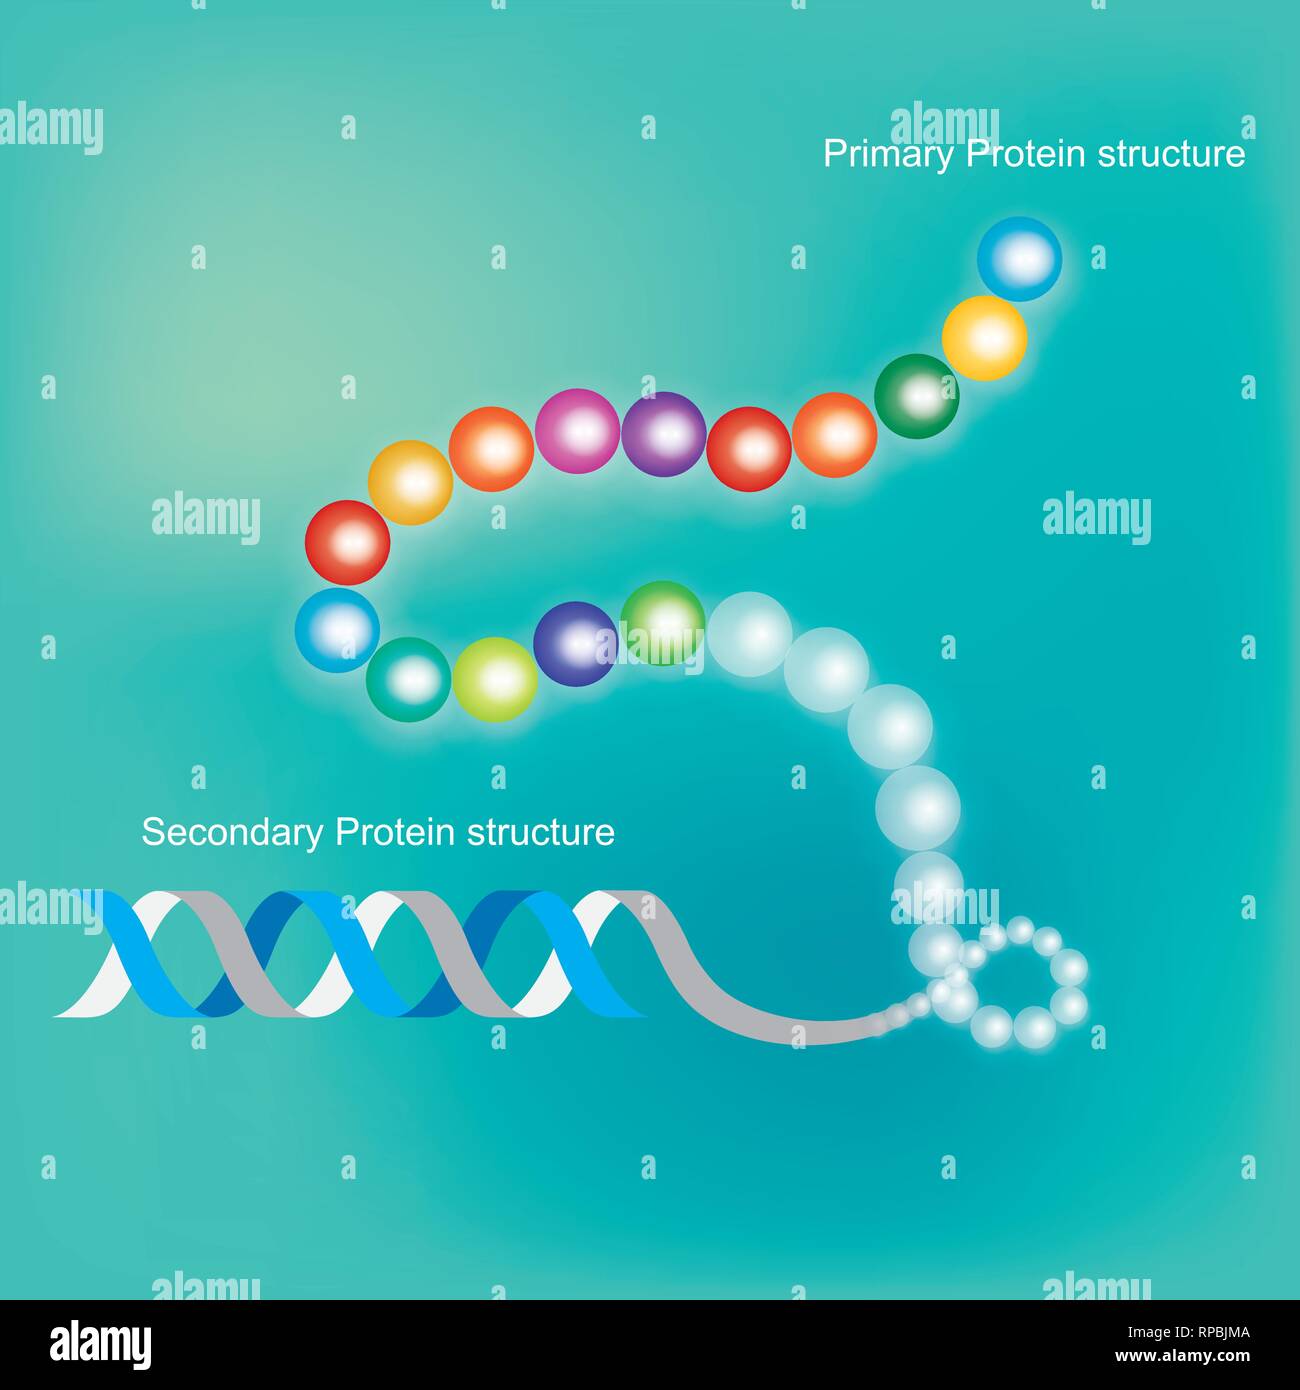 Protein Structure. Infographic Illustration. Stock Vector